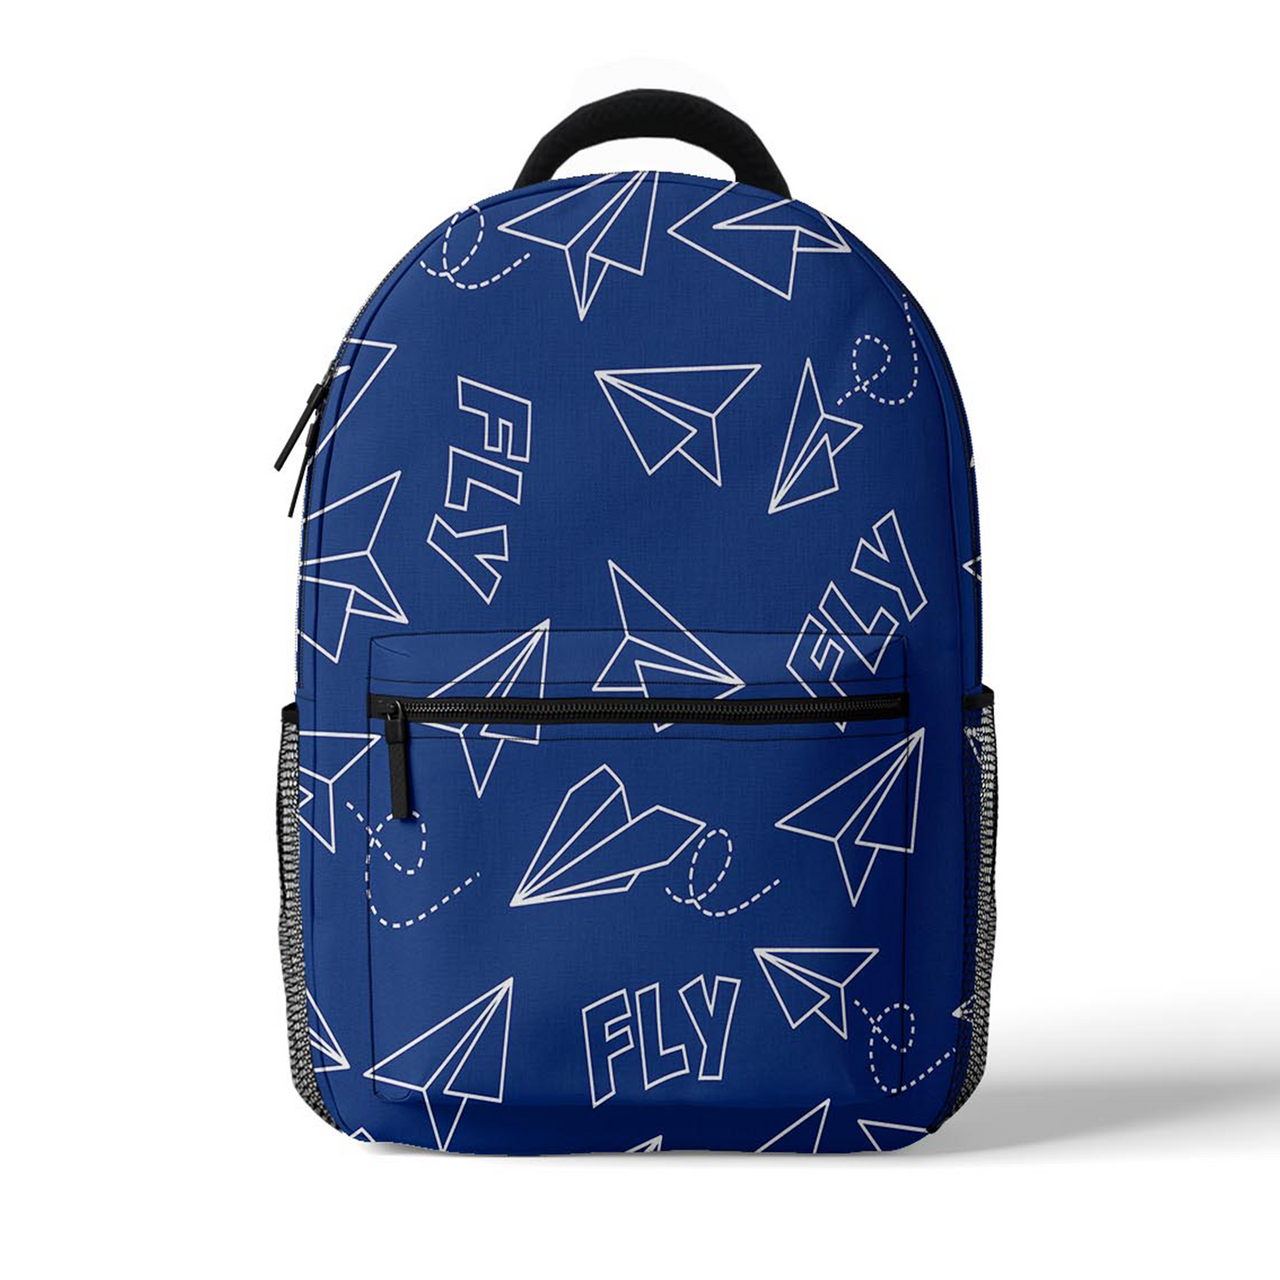 Paper Airplane & Fly (5 Colors) Designed 3D Backpacks